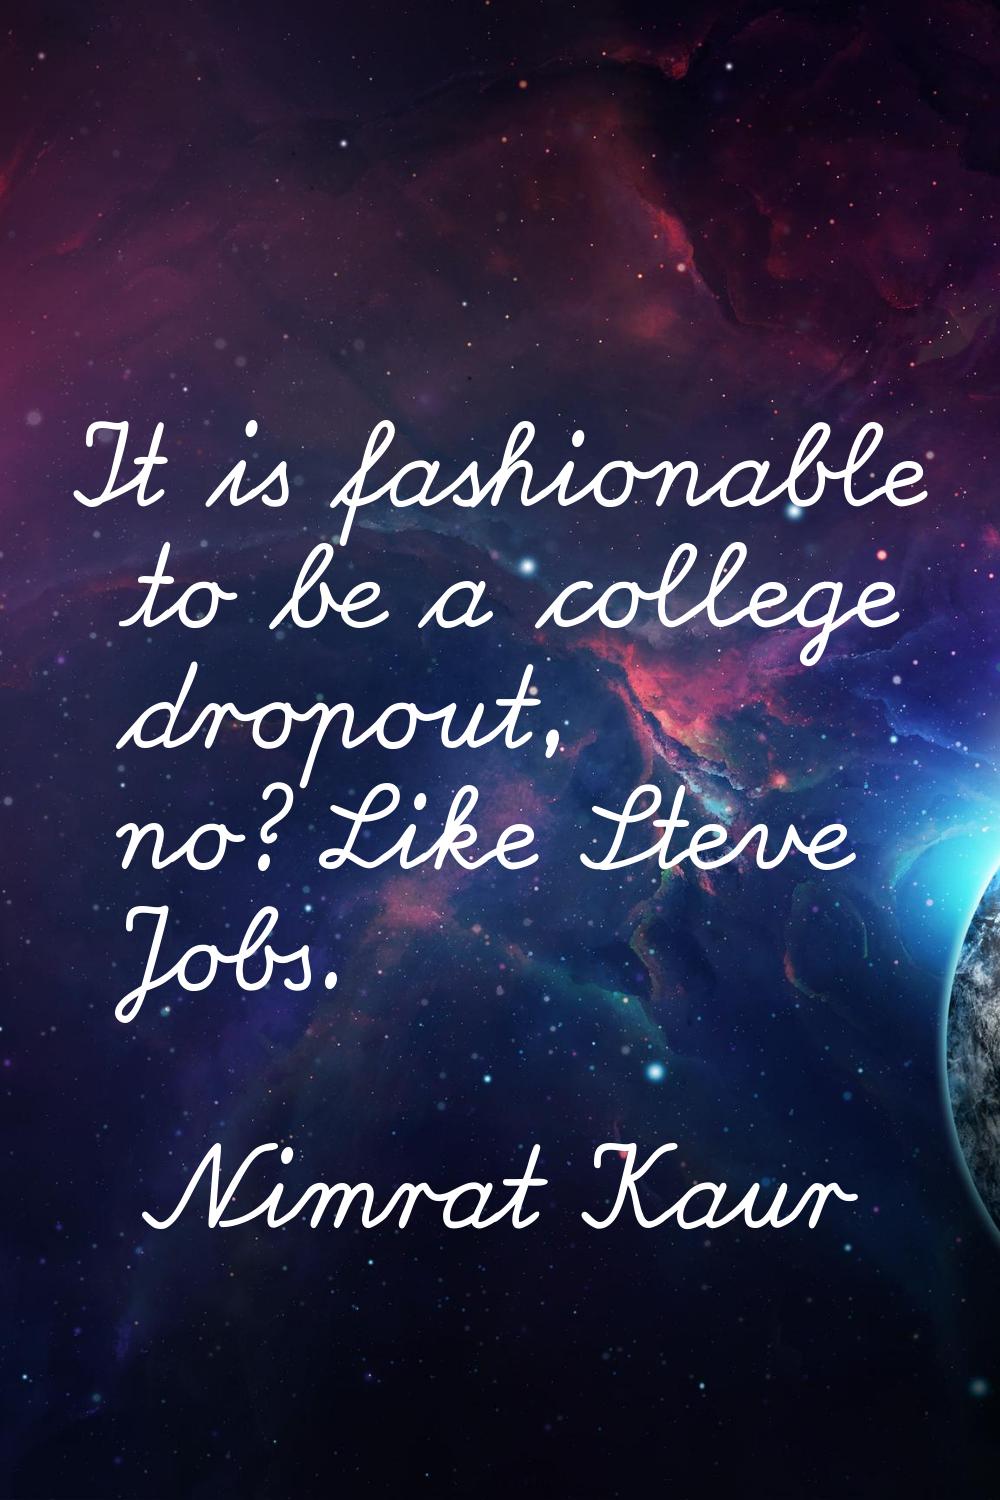 It is fashionable to be a college dropout, no? Like Steve Jobs.